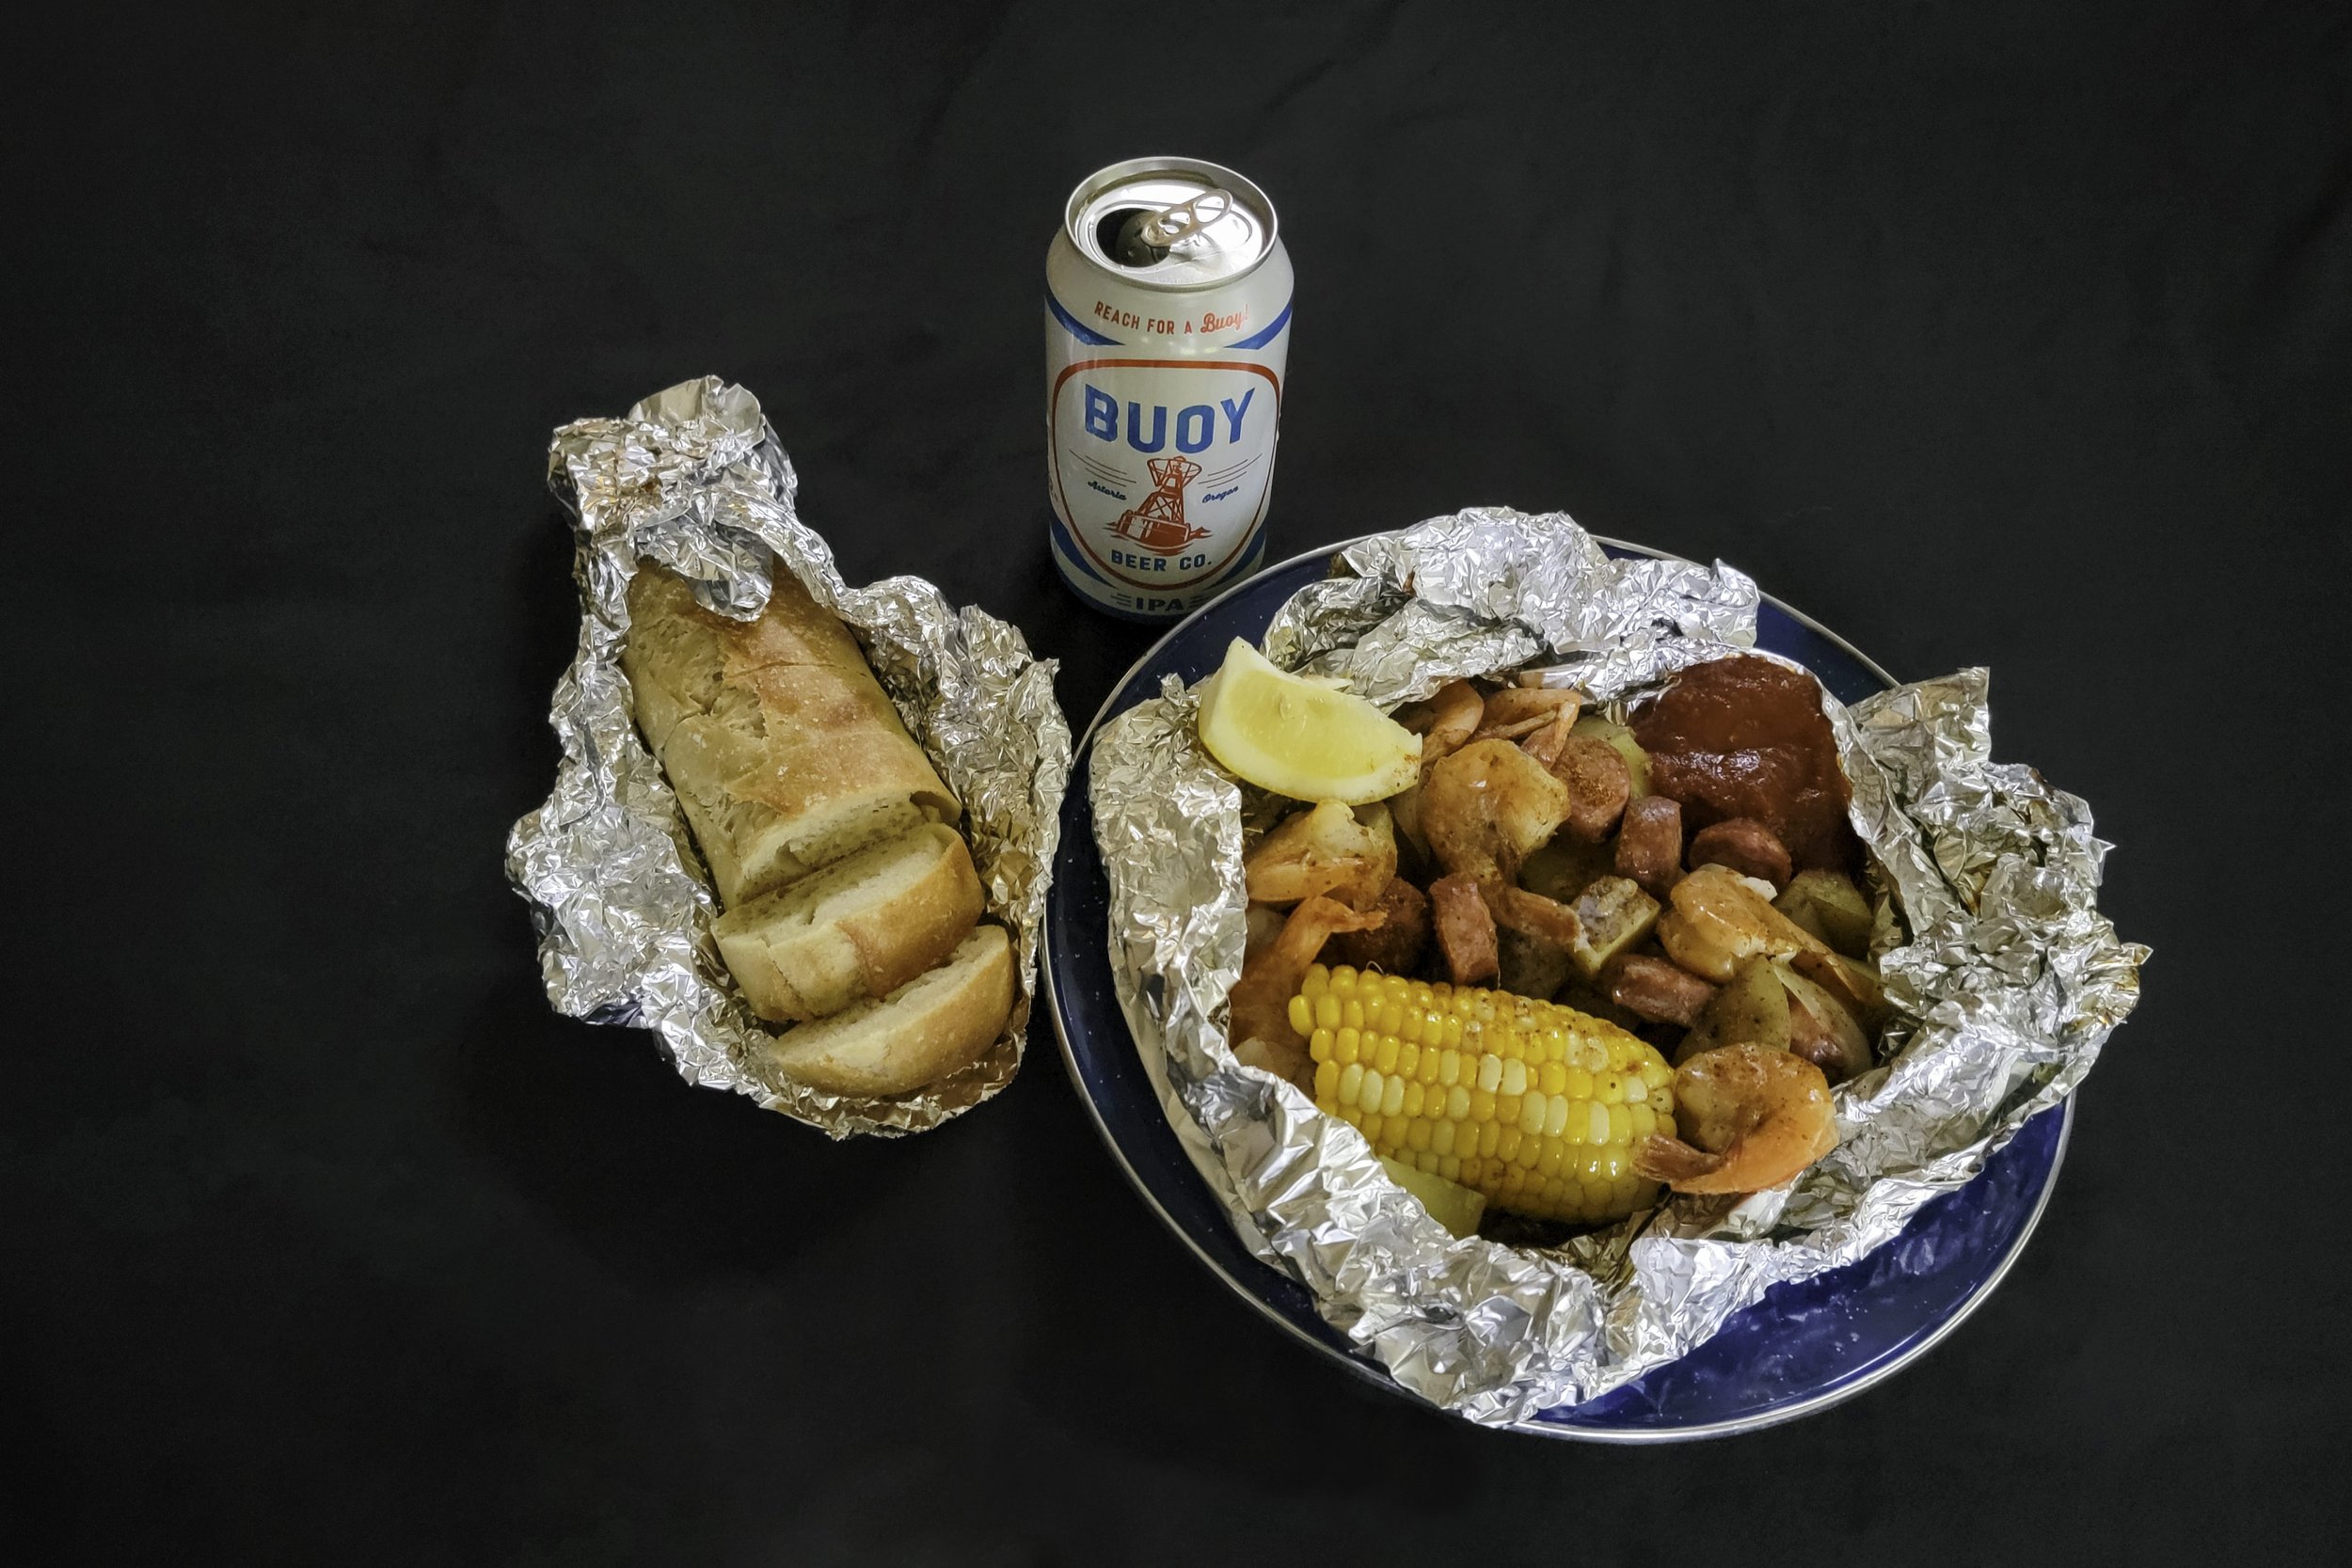 Low country boil foil packet meal with bread and beer